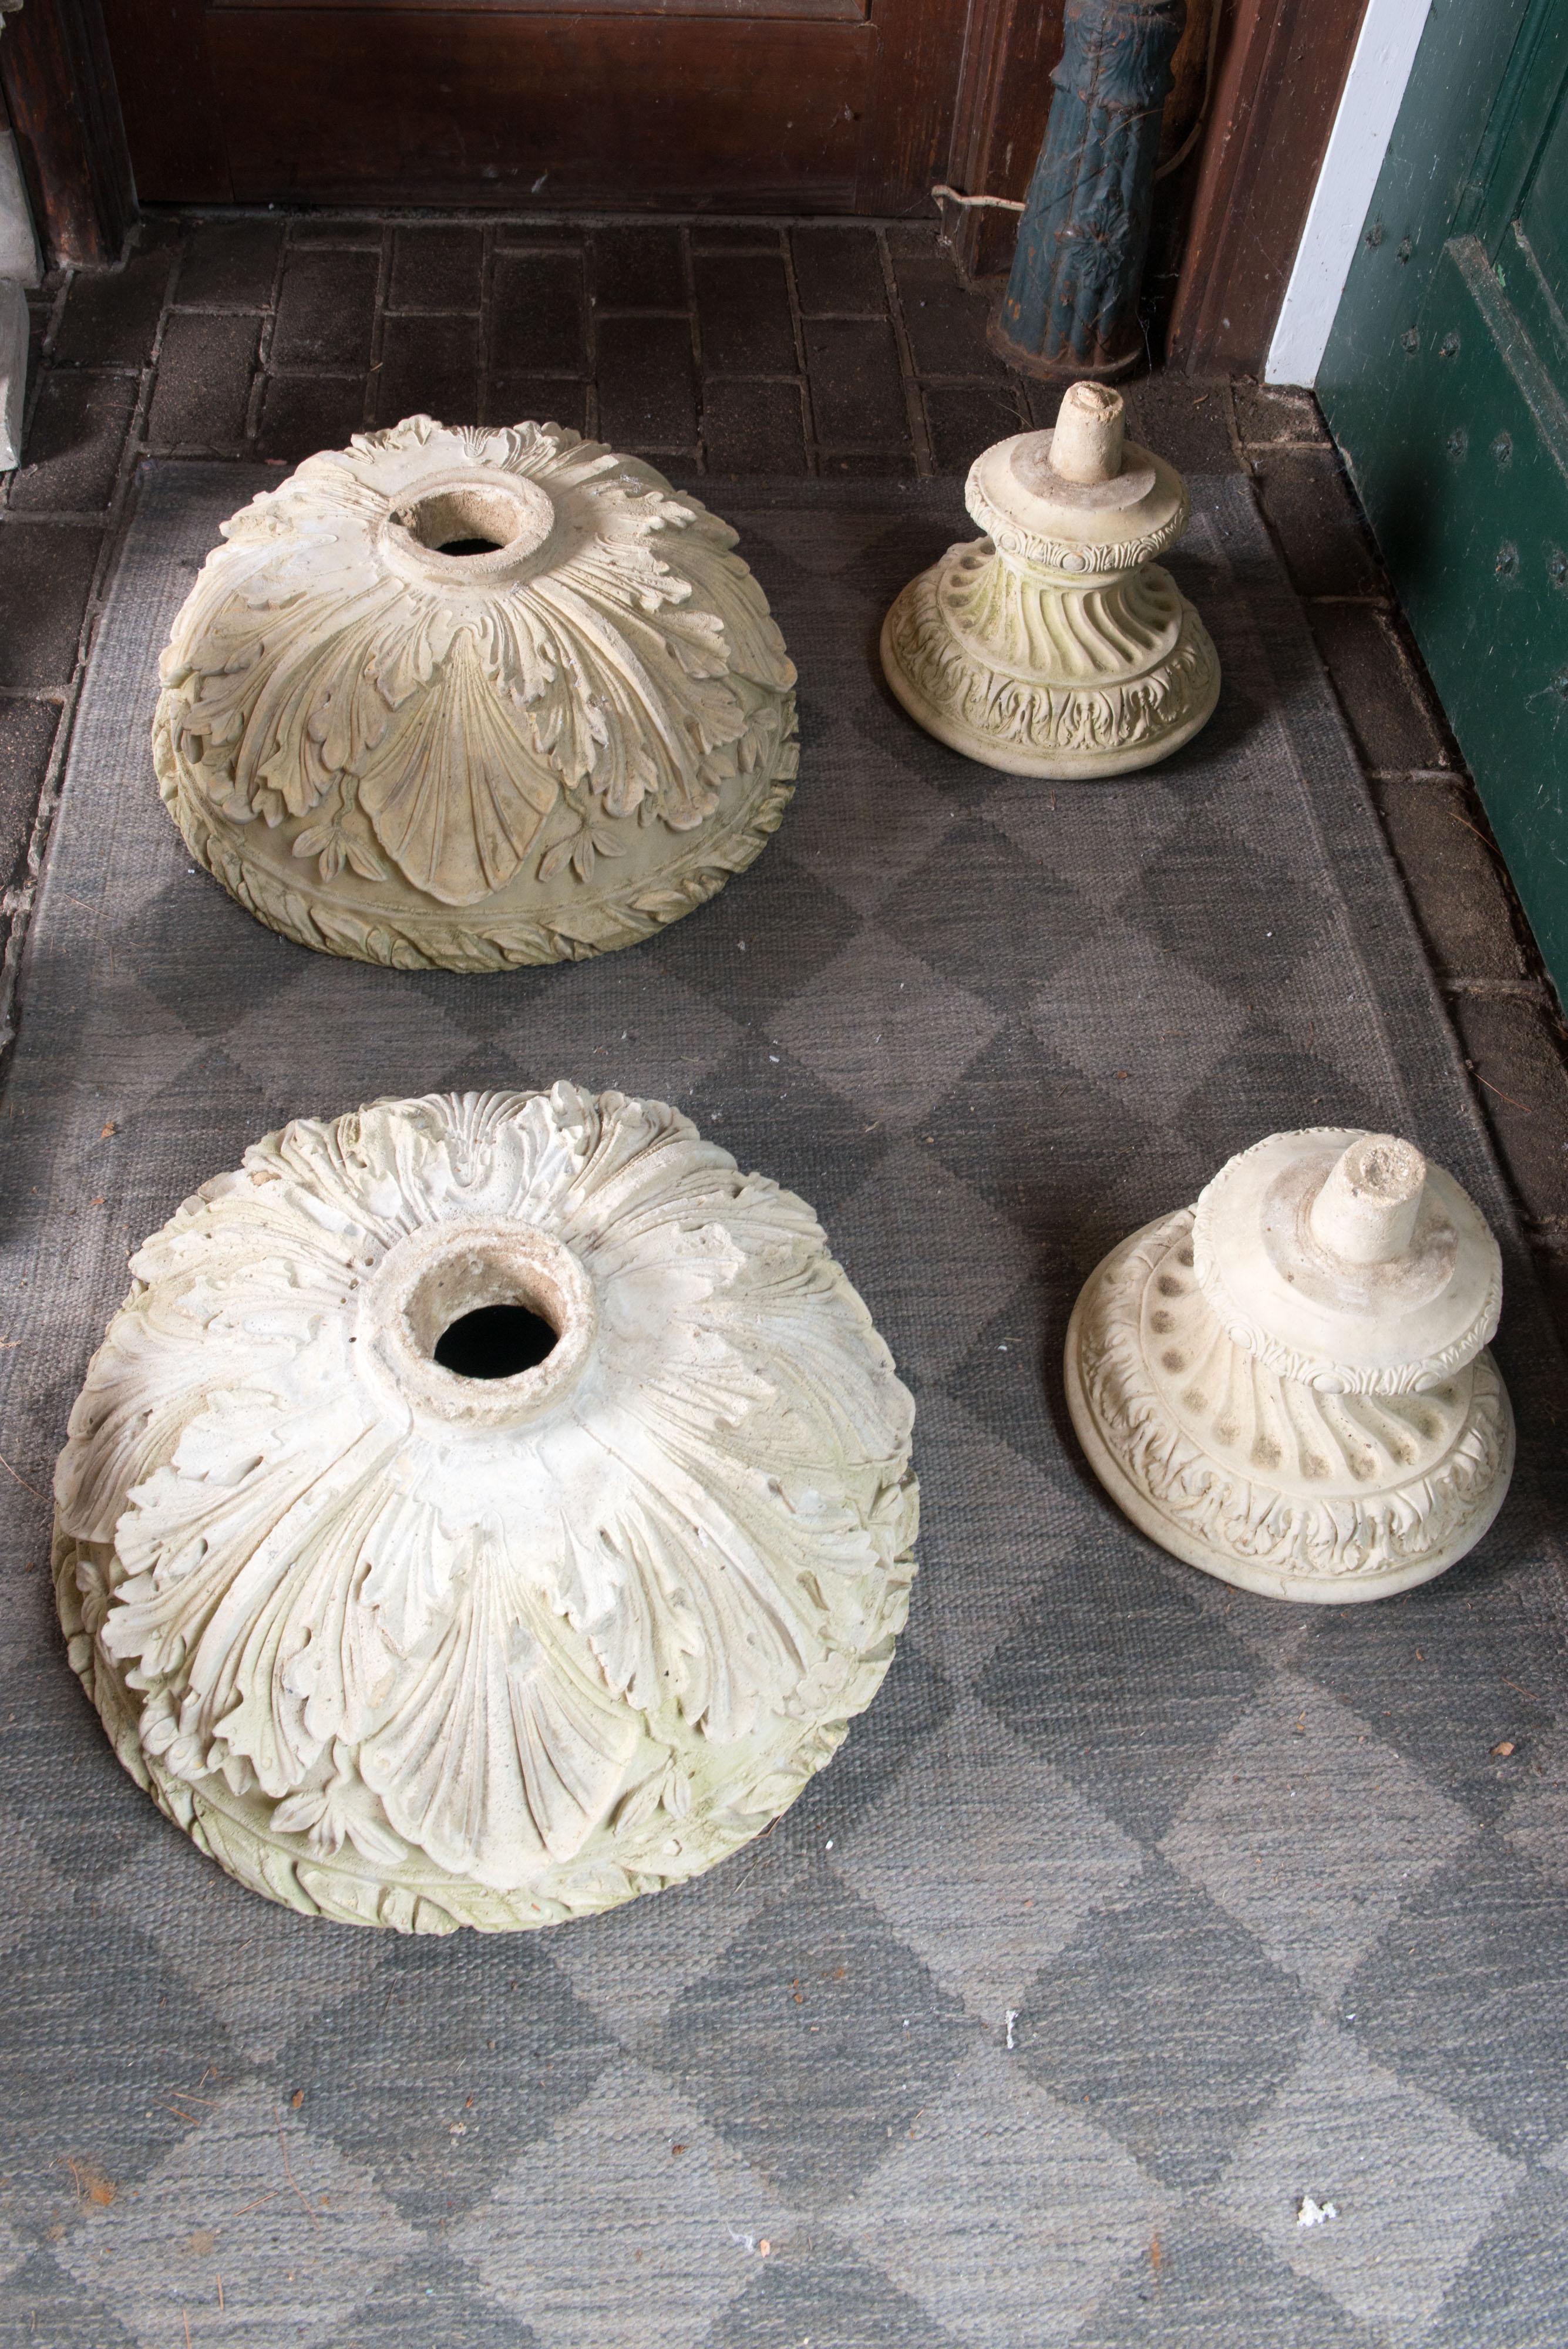 Intricately carved and cast pair of classical style urns. Yellowish-white carved pottery or aggregate with acanthus leaves on bowl, laurel and ribbon on the rim.
A handsome pair of classical style planters.